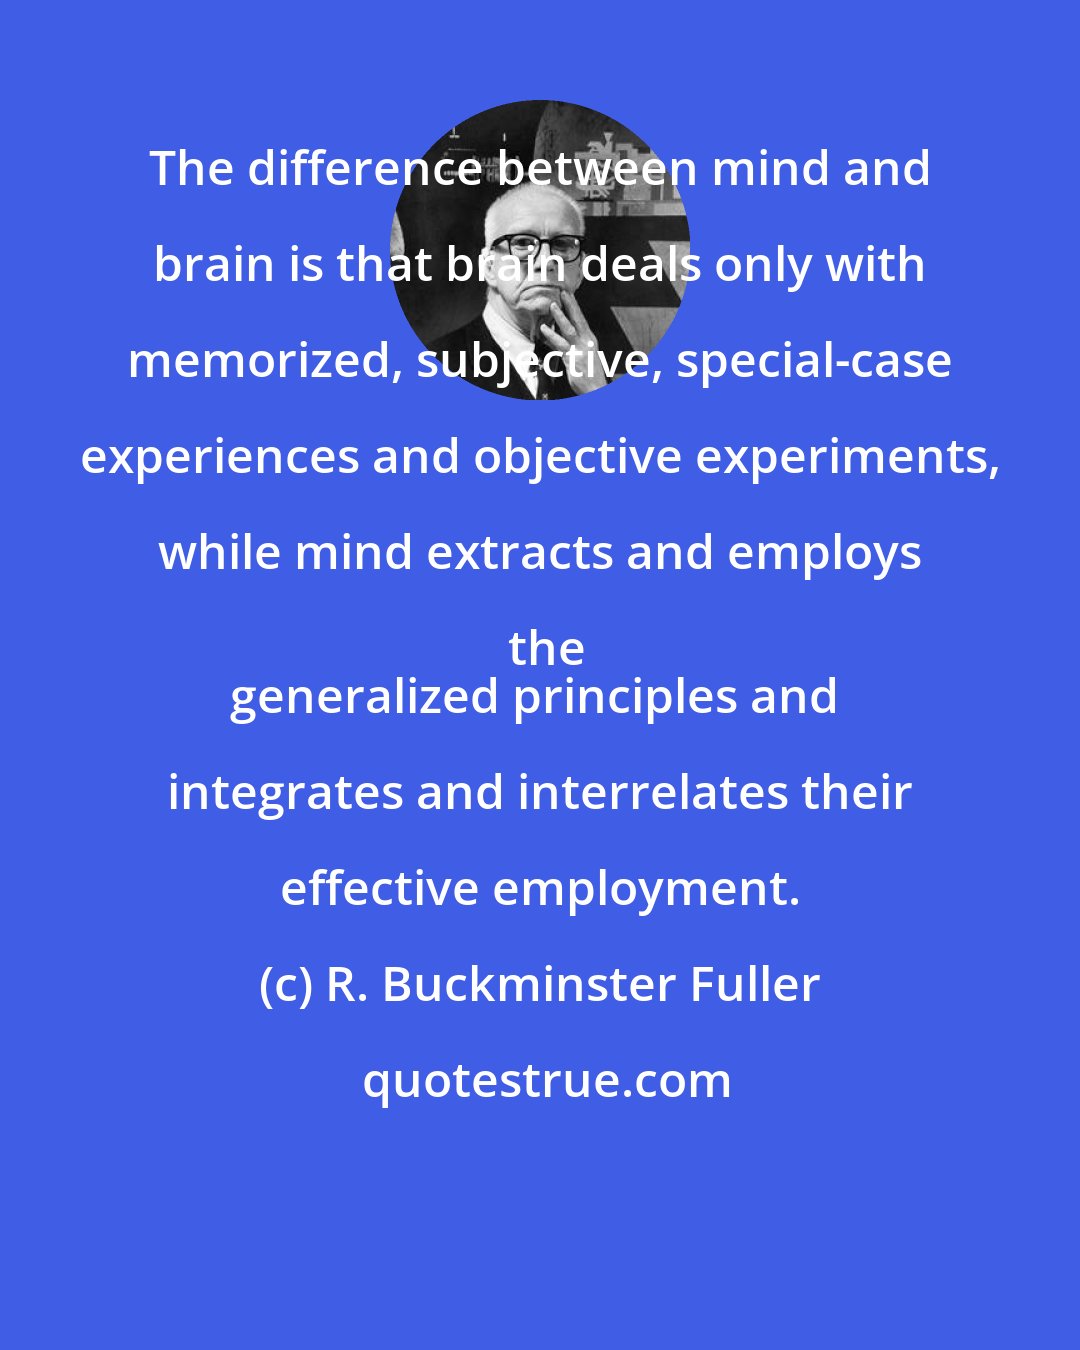 R. Buckminster Fuller: The difference between mind and brain is that brain deals only with memorized, subjective, special-case experiences and objective experiments, while mind extracts and employs the
generalized principles and integrates and interrelates their effective employment.